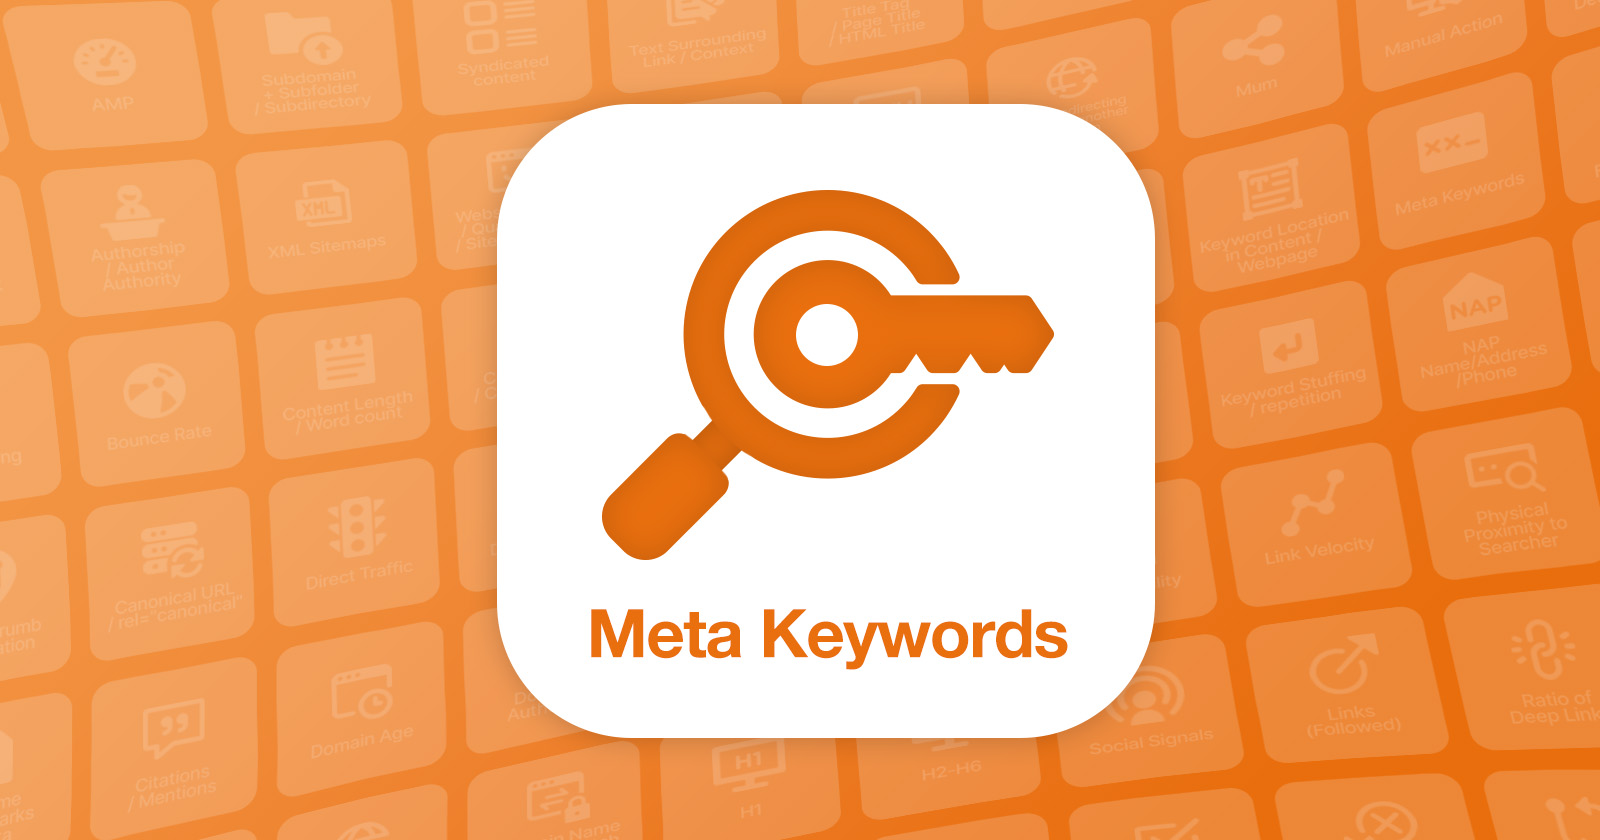 Is The Meta Keywords Tag A Ranking Factor?